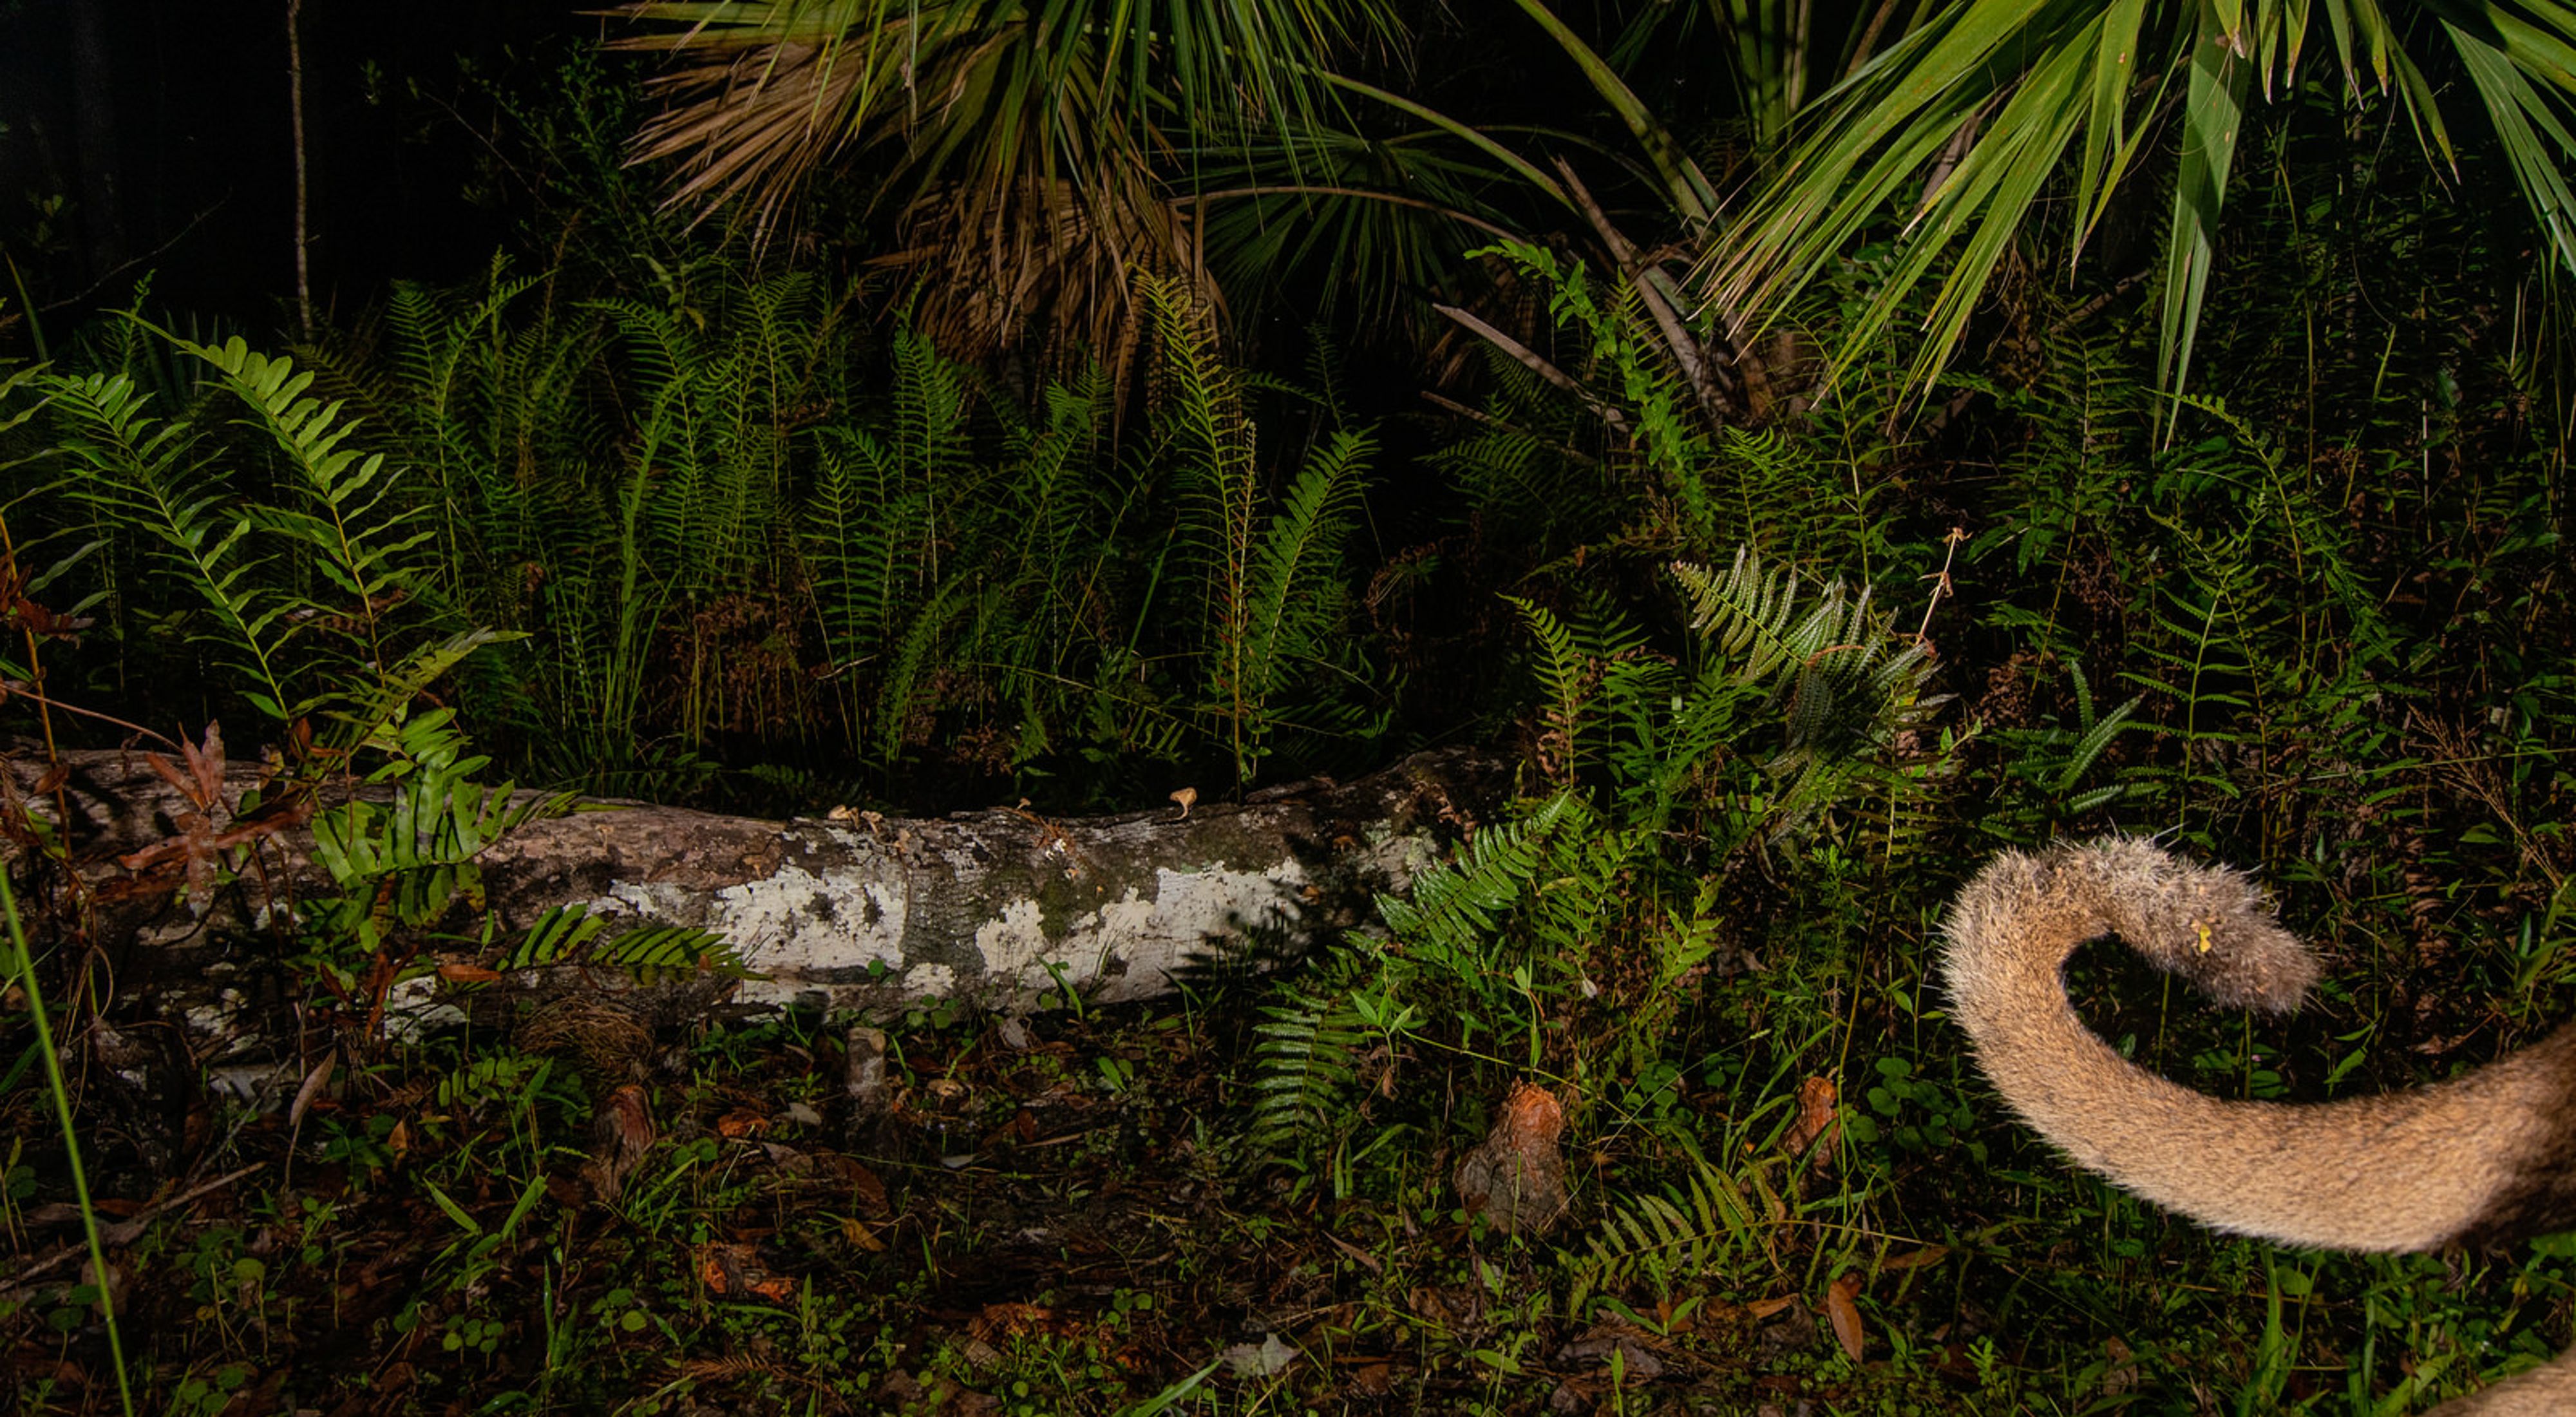 A Florida panther's tail flicks by at night in the florida wild with ferns